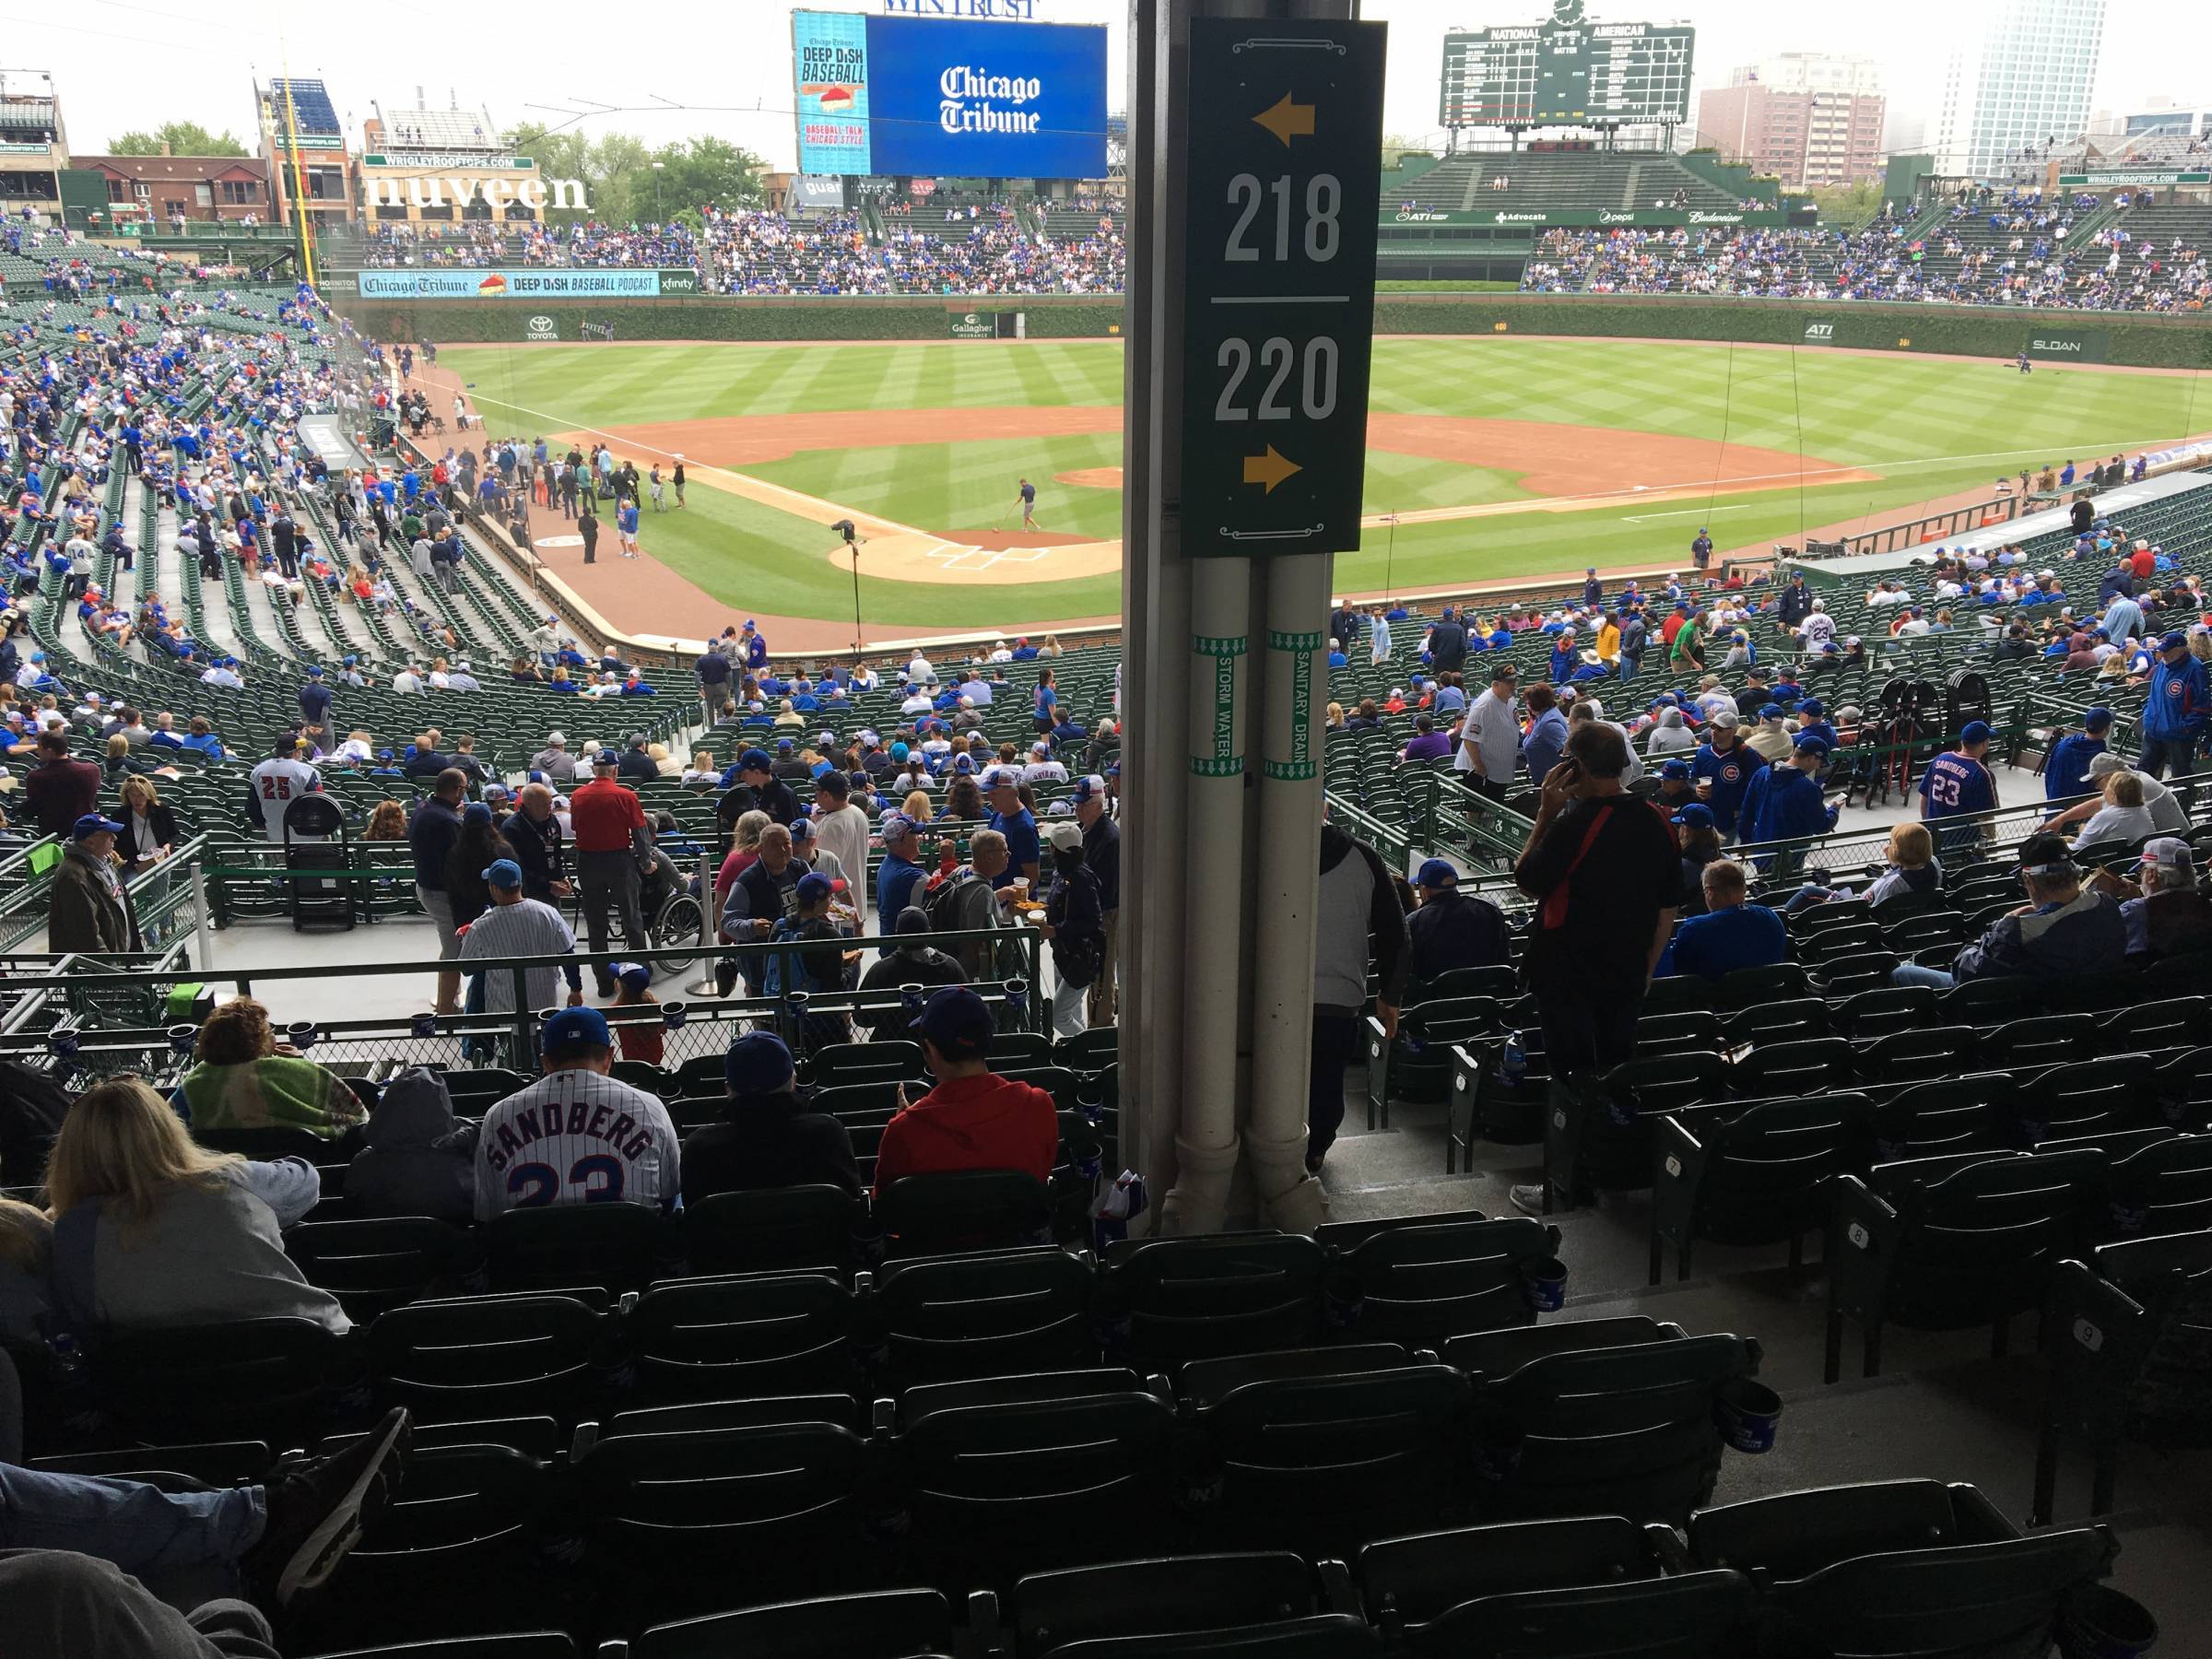 Pole in Section 218 at Wrigley Field